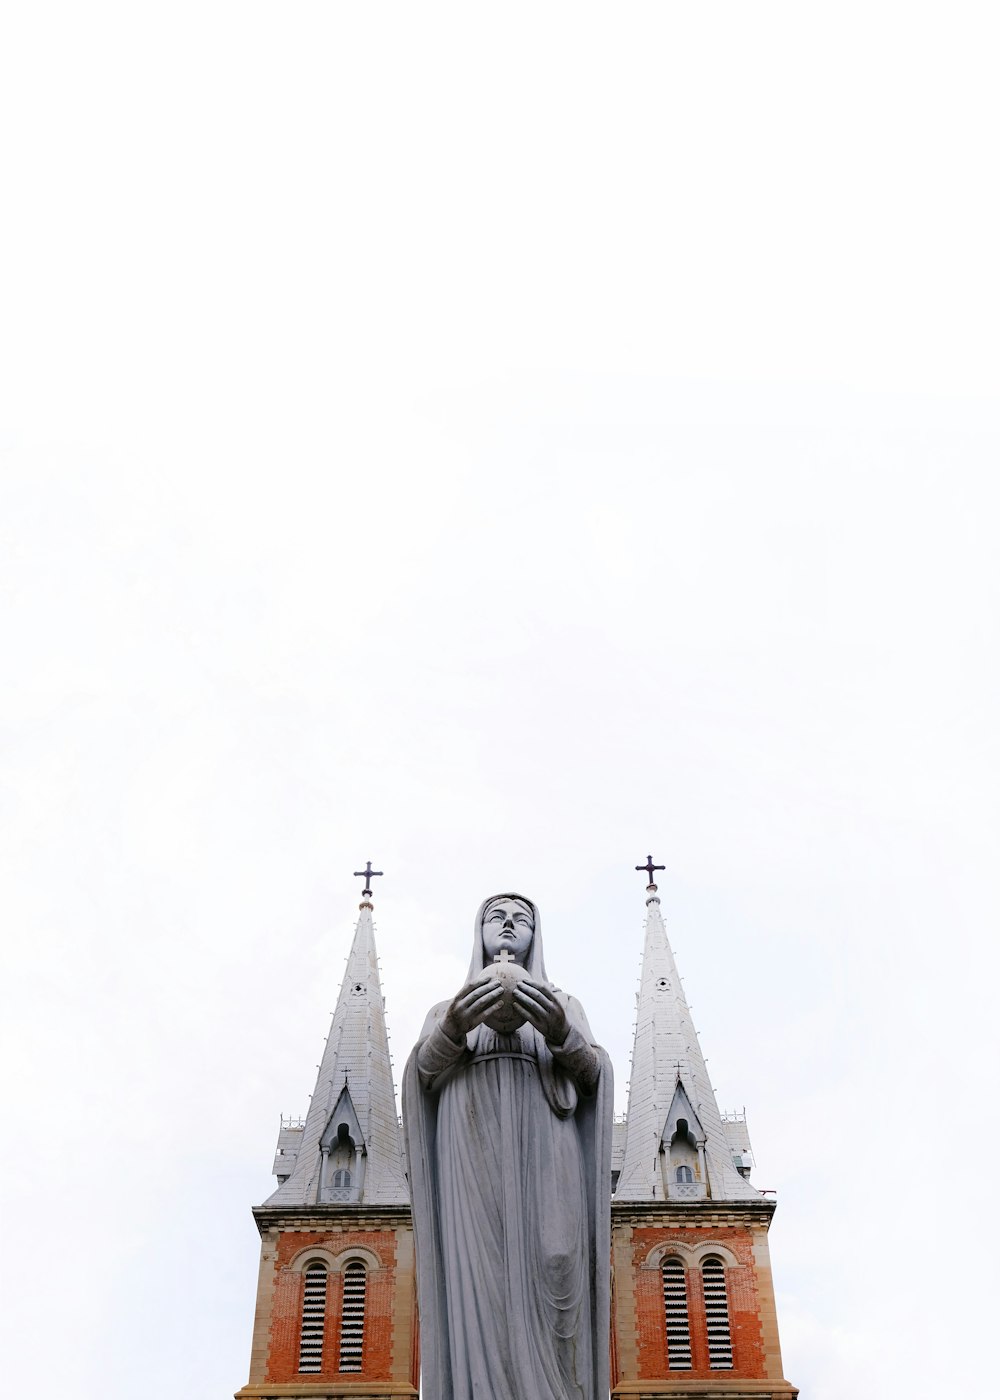 low-angle photography of religious sculpture outside cathedral during daytime